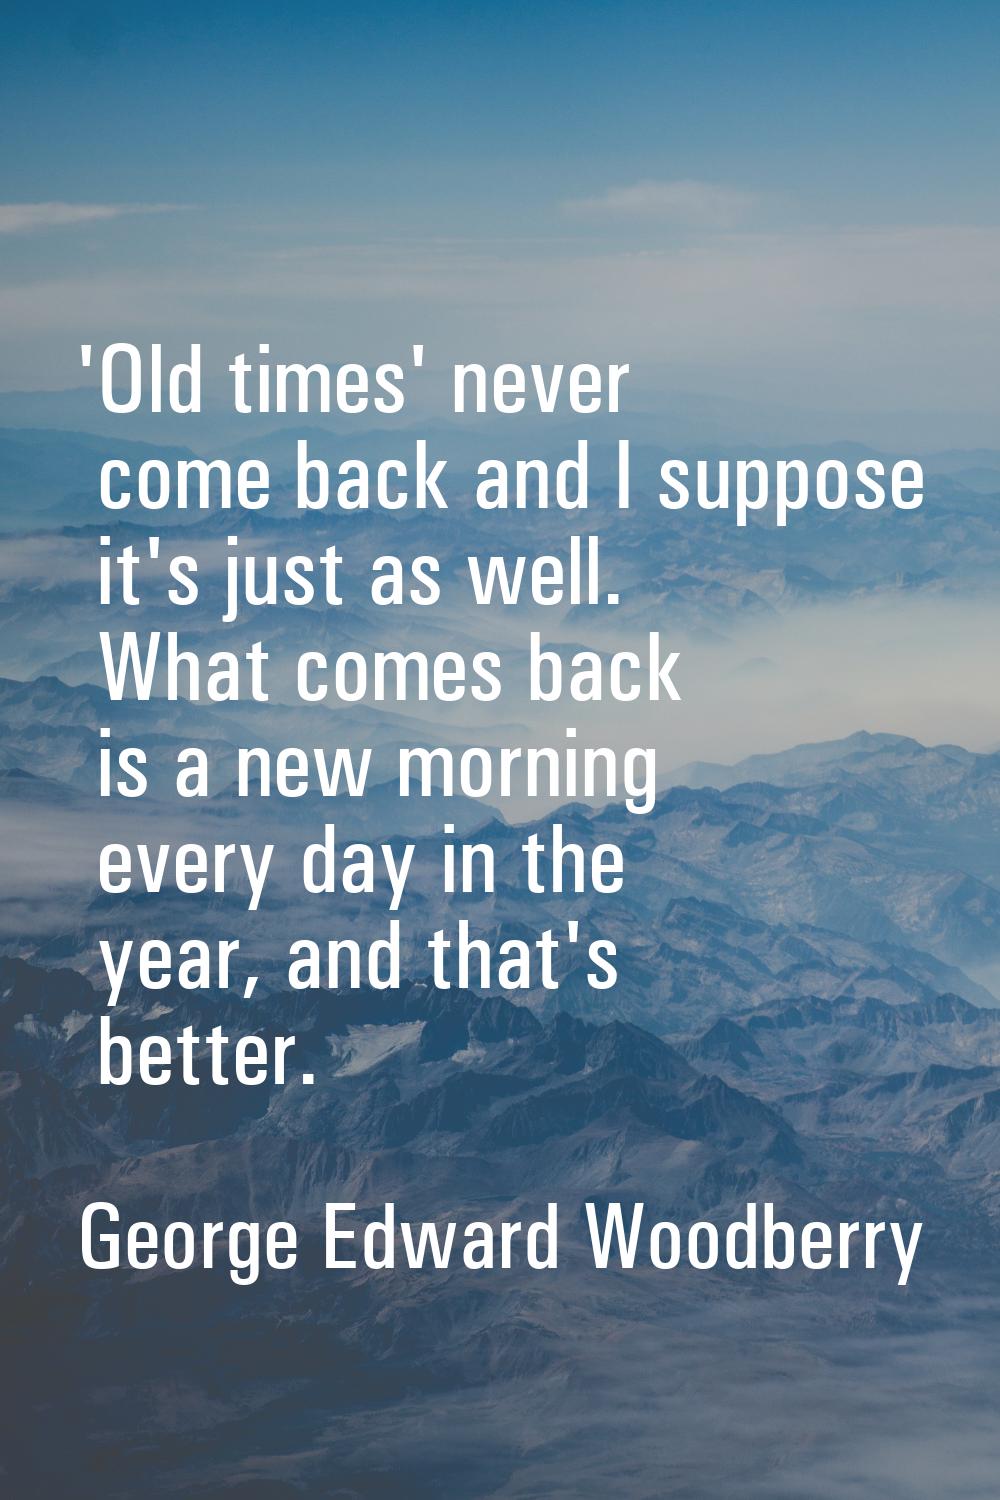 'Old times' never come back and I suppose it's just as well. What comes back is a new morning every